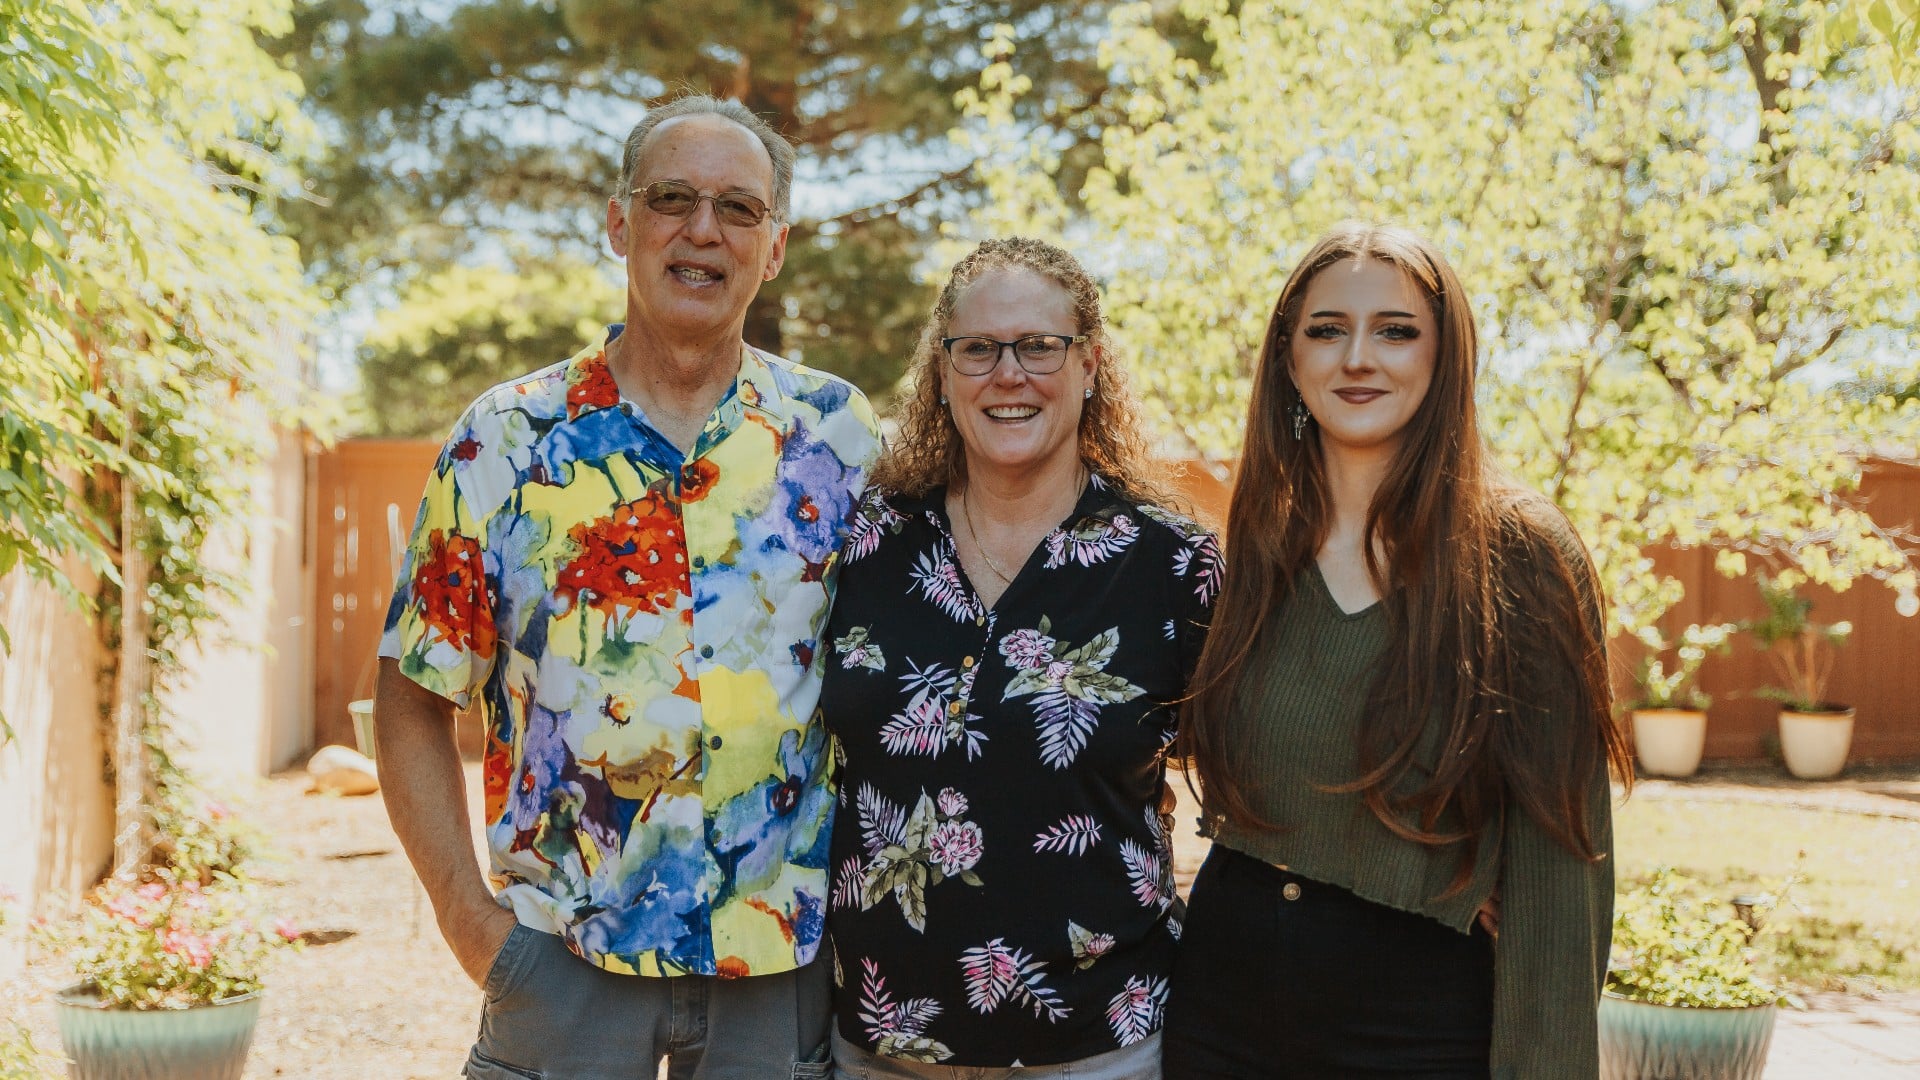 A man, woman and young girl standing close for a photo outside surrounded by trees and sunshine